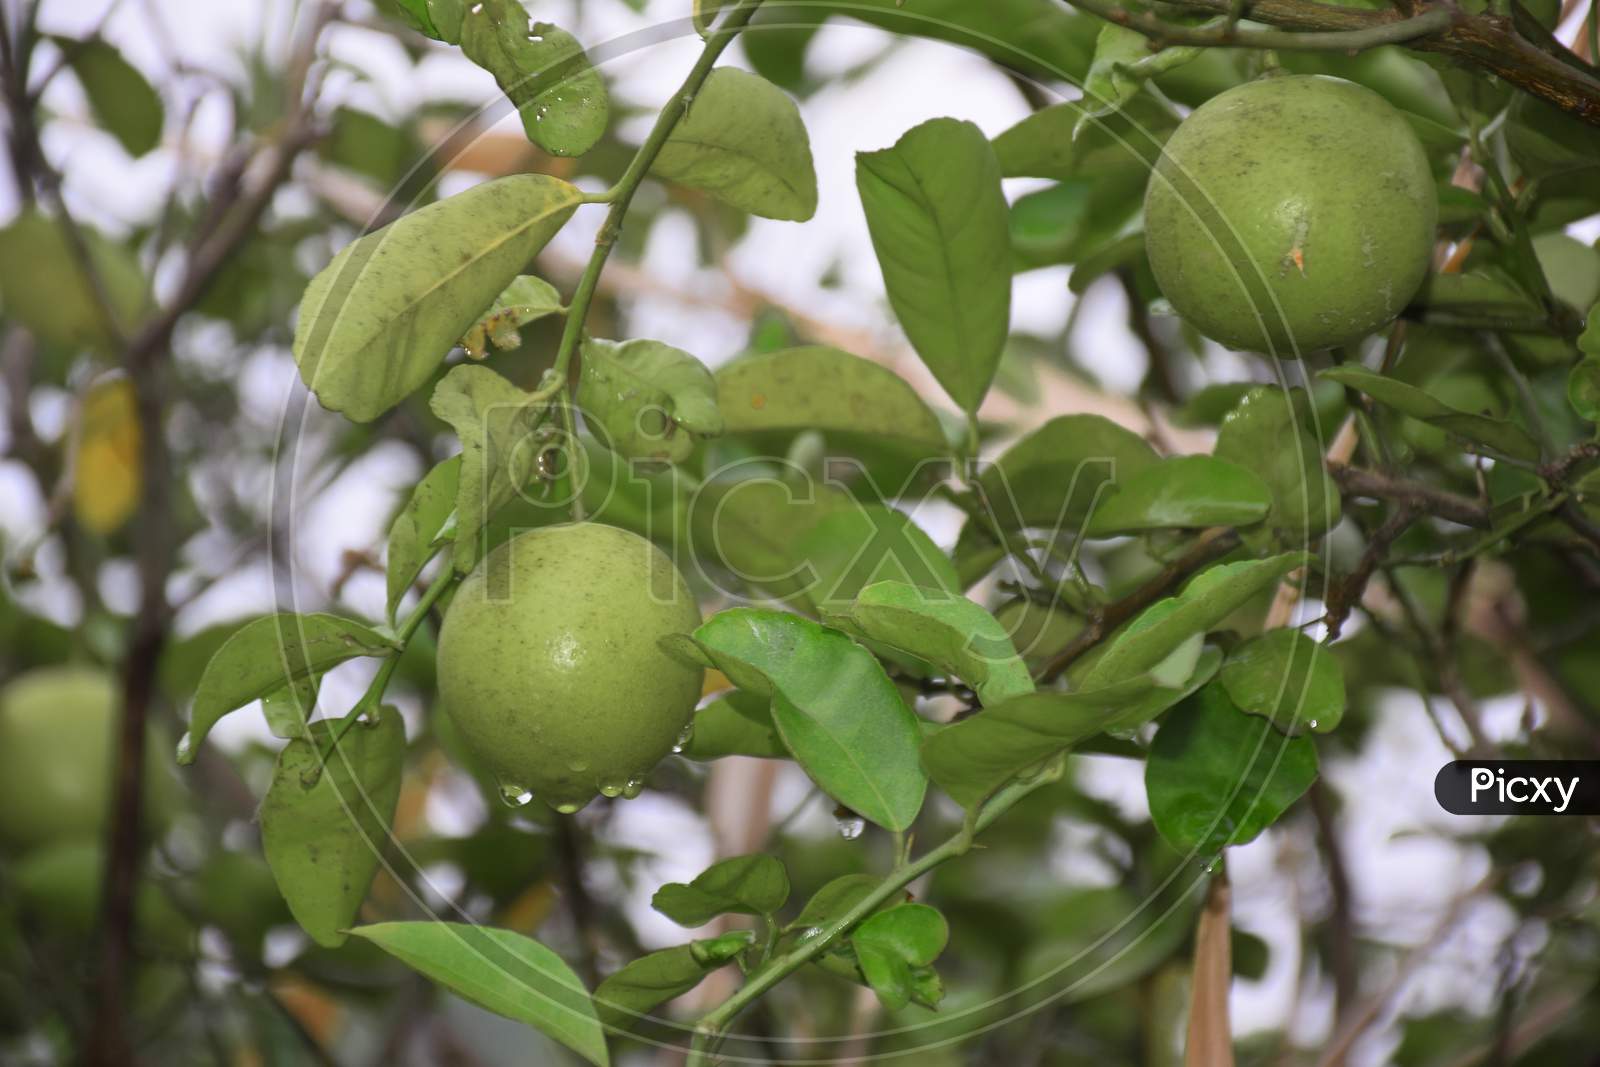 Green And Fresh Big Lemon On Tree With Man'S Hand, Blur Background